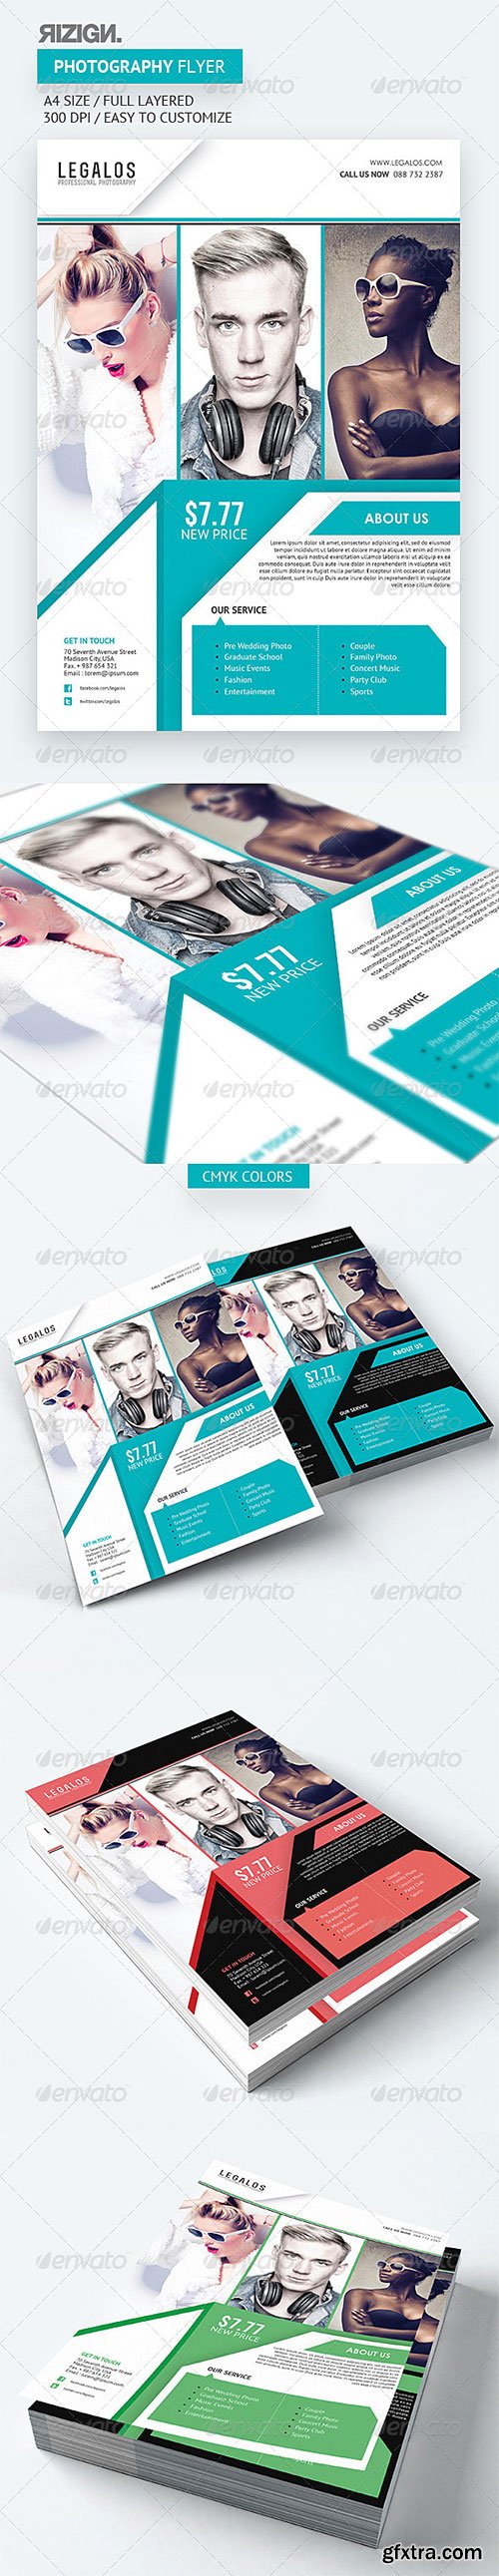 GraphicRiver - Photography Flyer 5669457